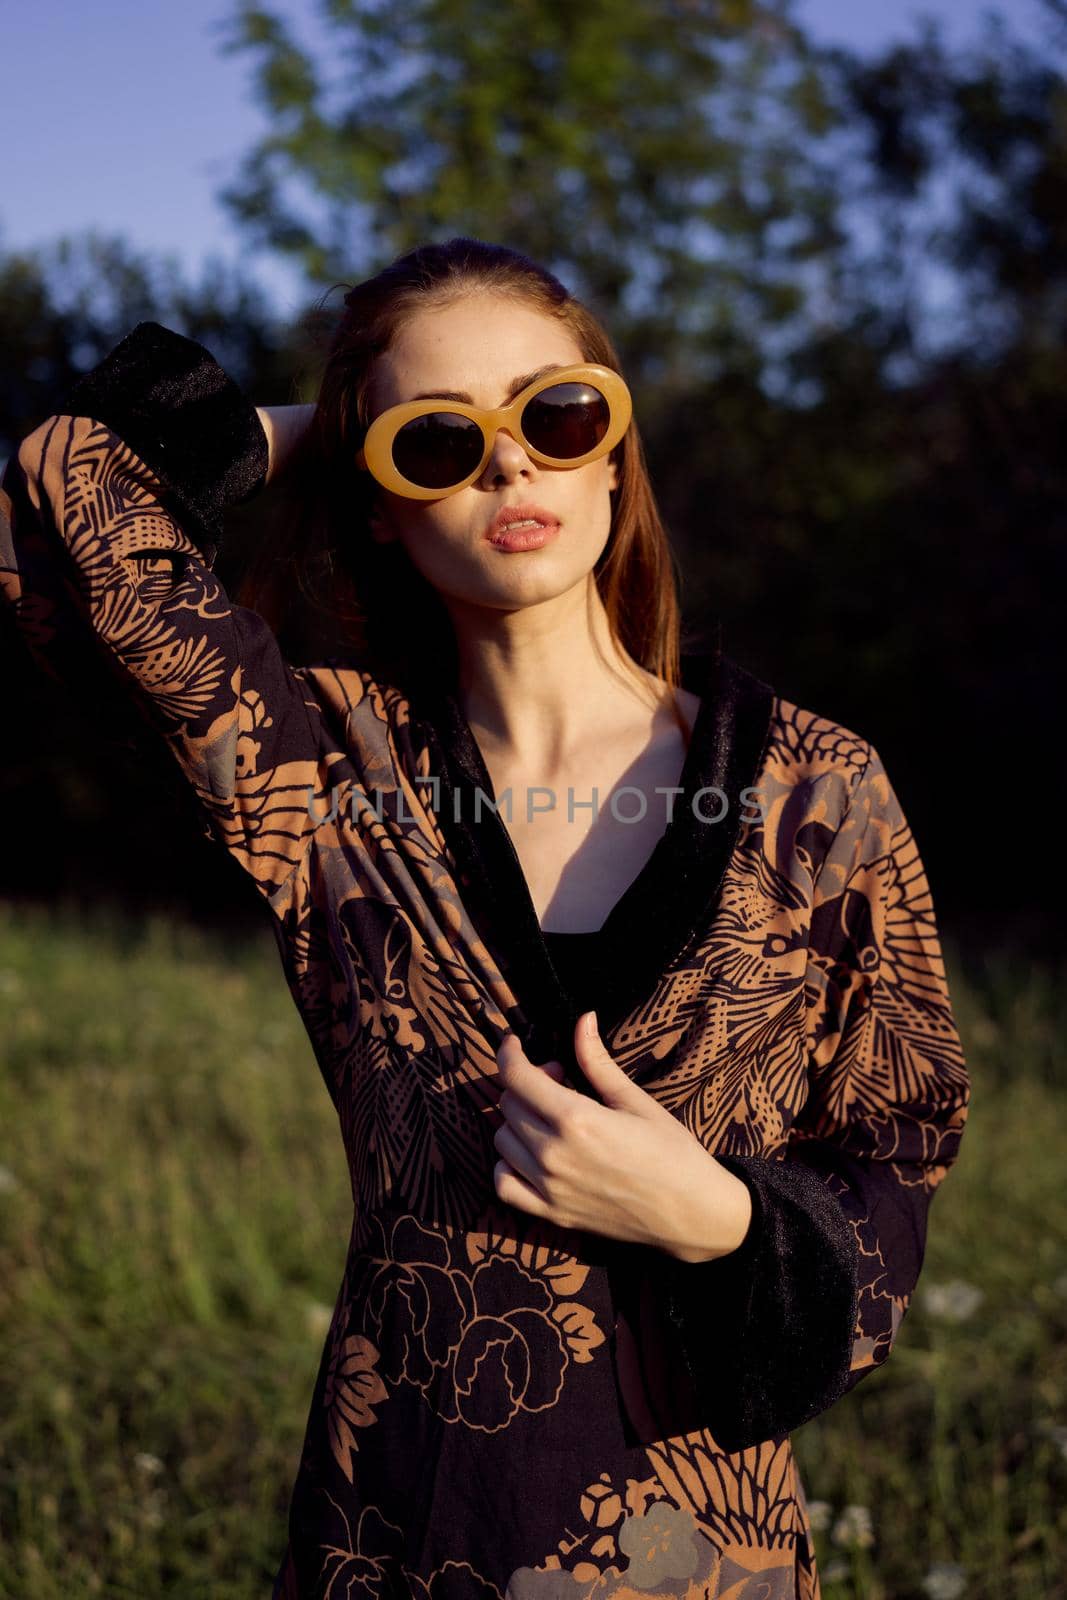 fashionable woman in sunglasses outdoors summer glamor. High quality photo